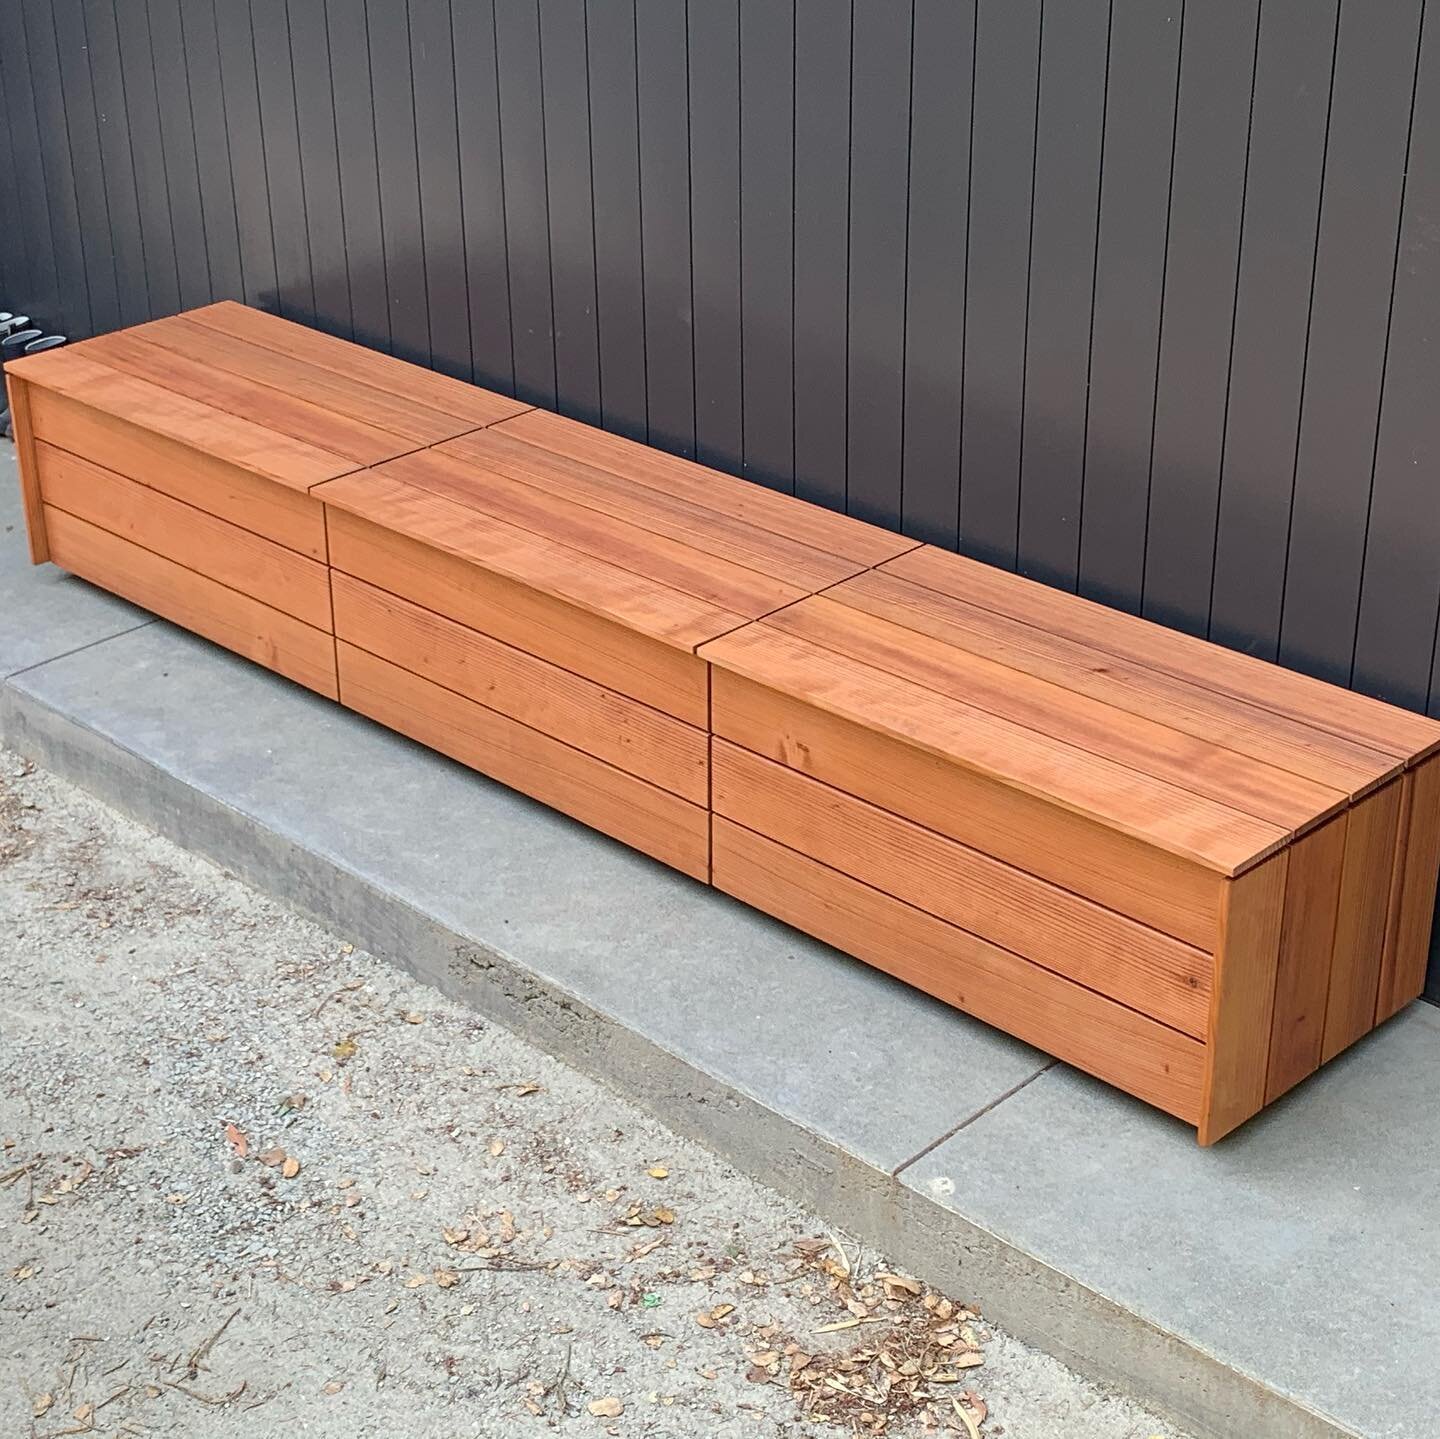 Redwood storage bench just installed. 

Designed by 
@hennesseyarchitecture 
Built by @gregdlaird